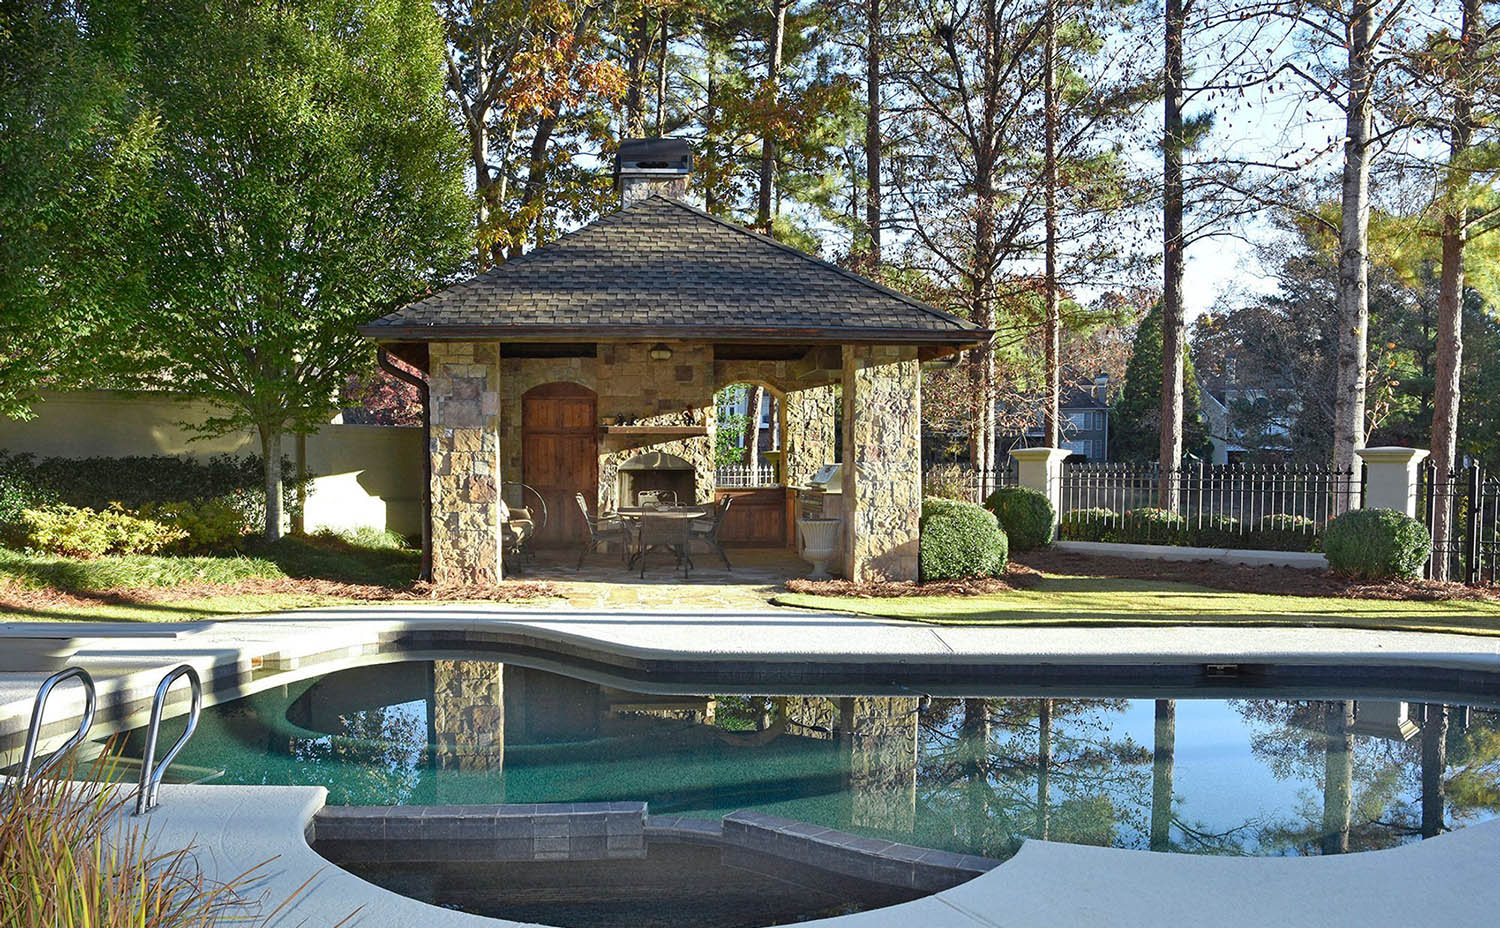 Beautiful small pool house design with real stone veneer siding. Real wood doors and an outdoor fireplace. Concrete patio surround. In ground pool.